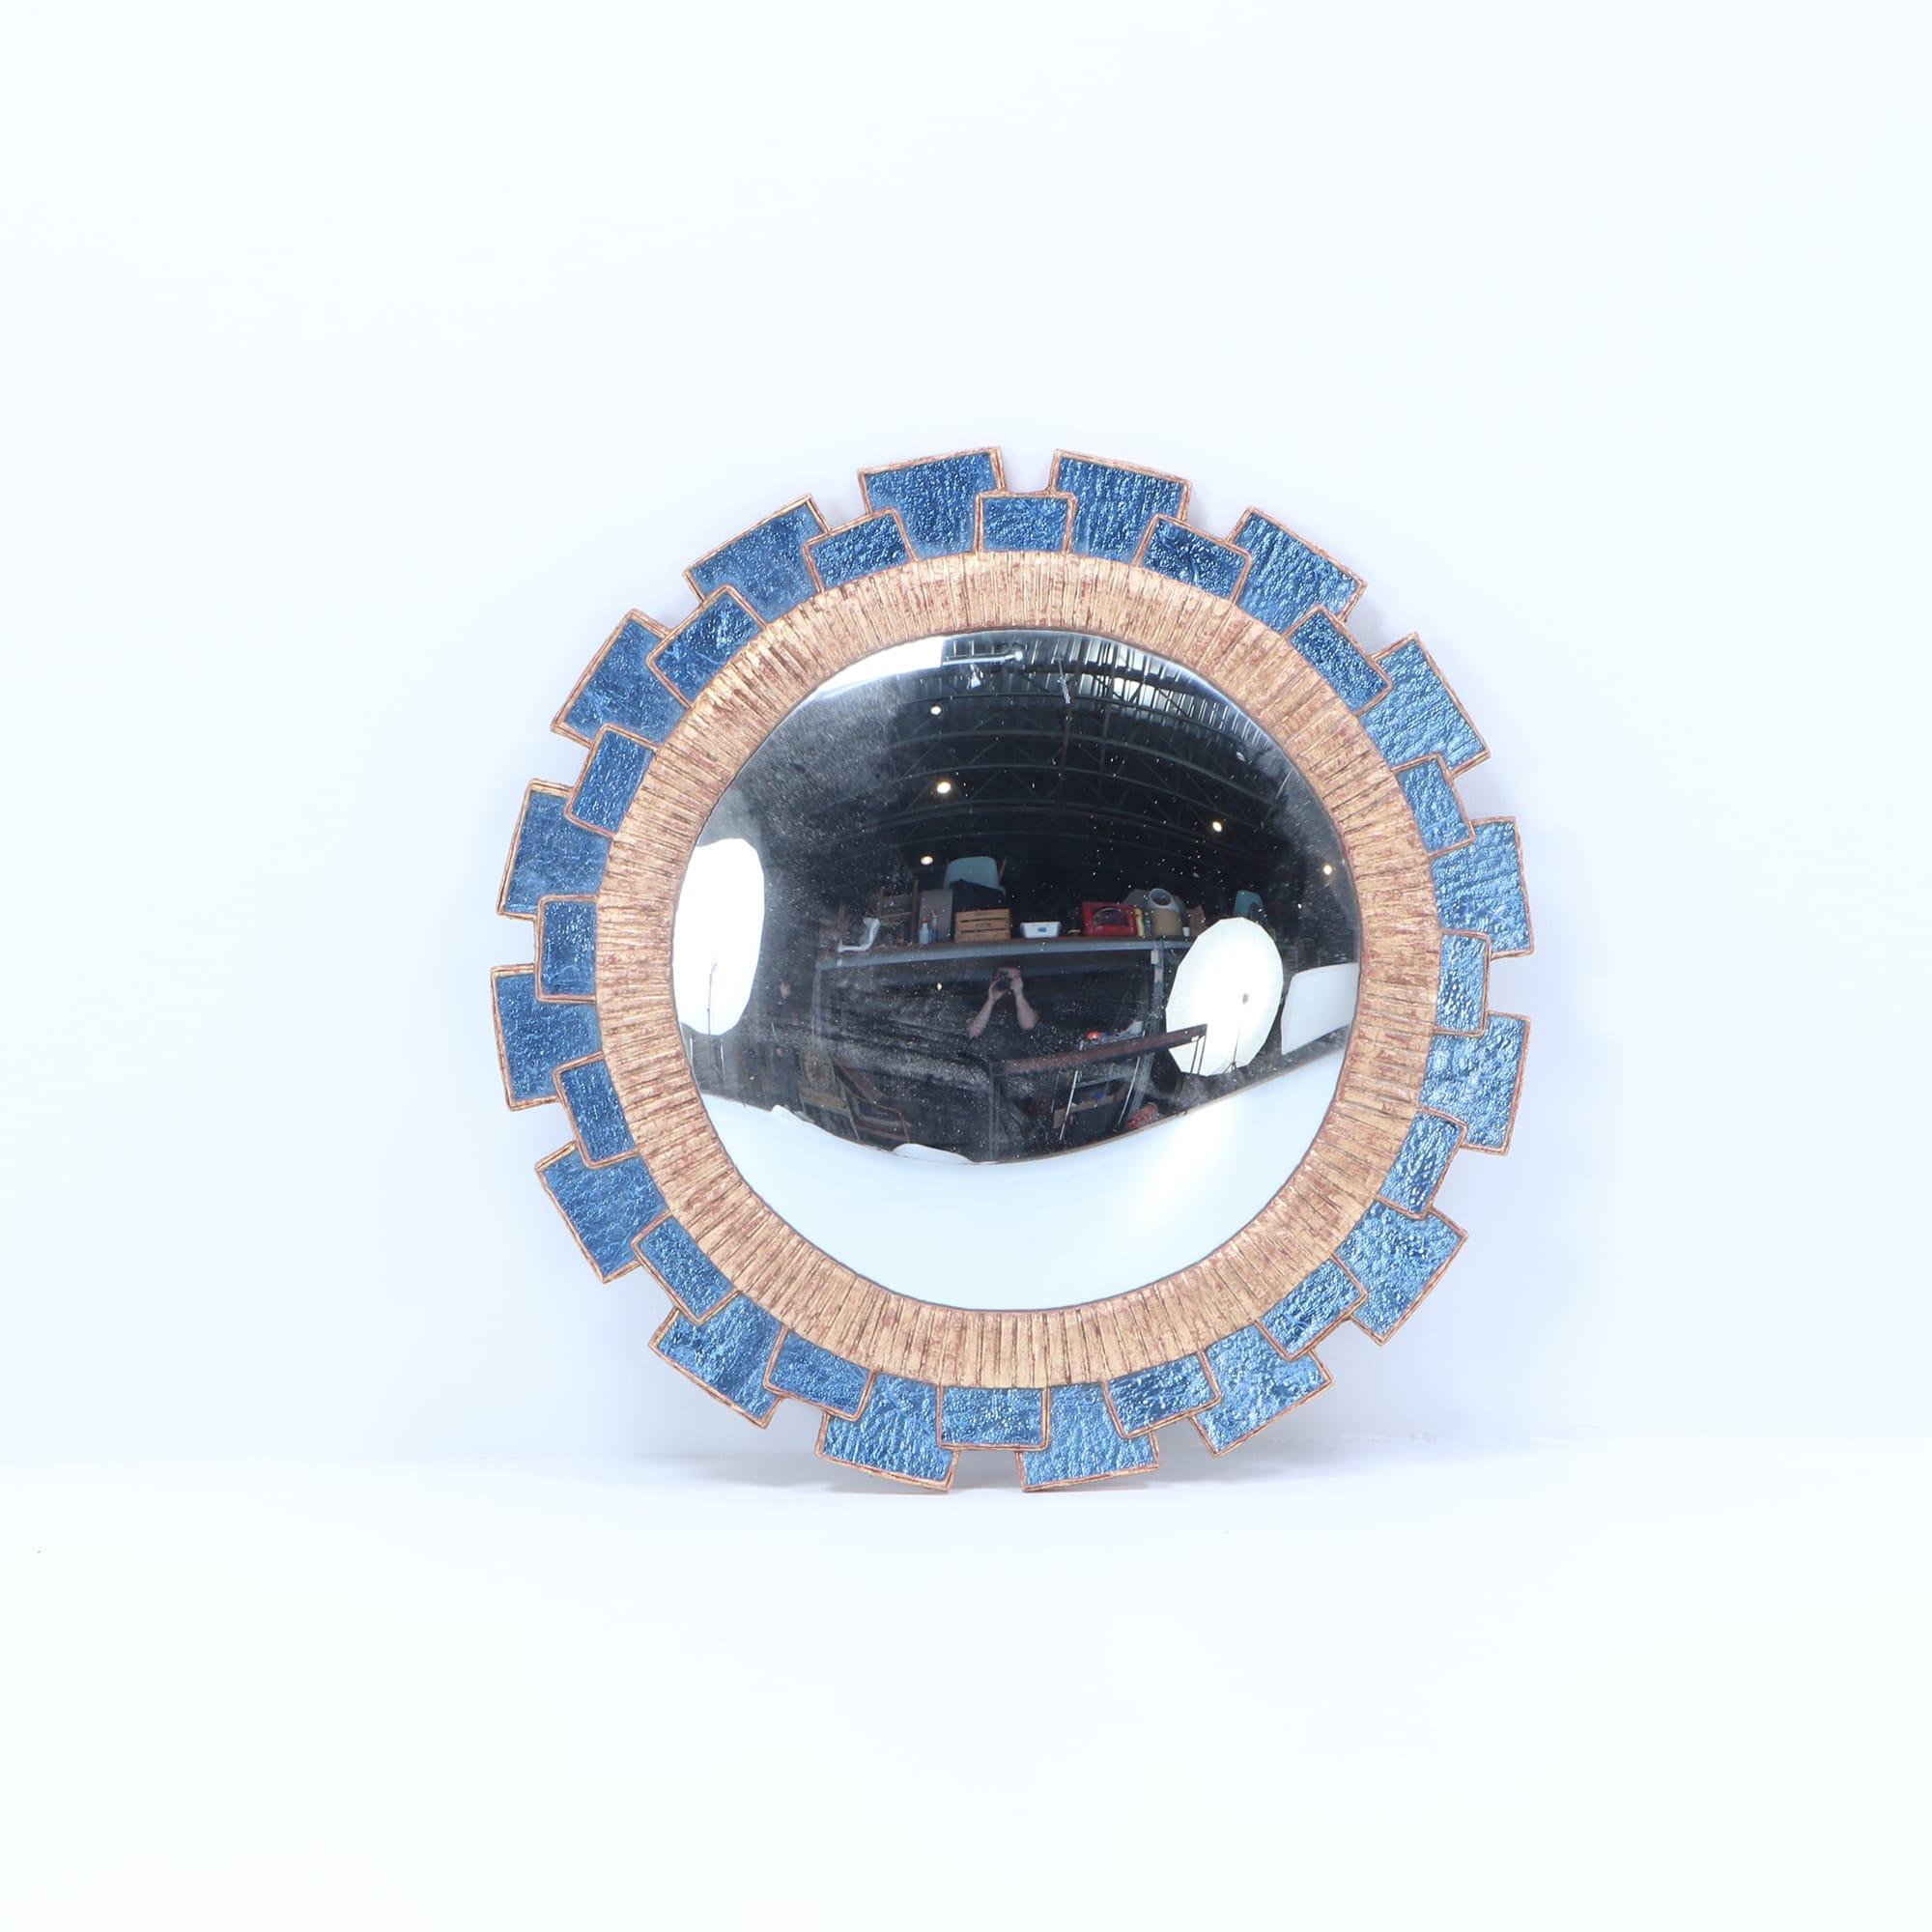 A blue glass and resin convex mirror having textured glass arranged in a geometric fashion in the manner of Line Vautrin. Contemporary. These mirrors are made by hand by an artist and can be made to order. 